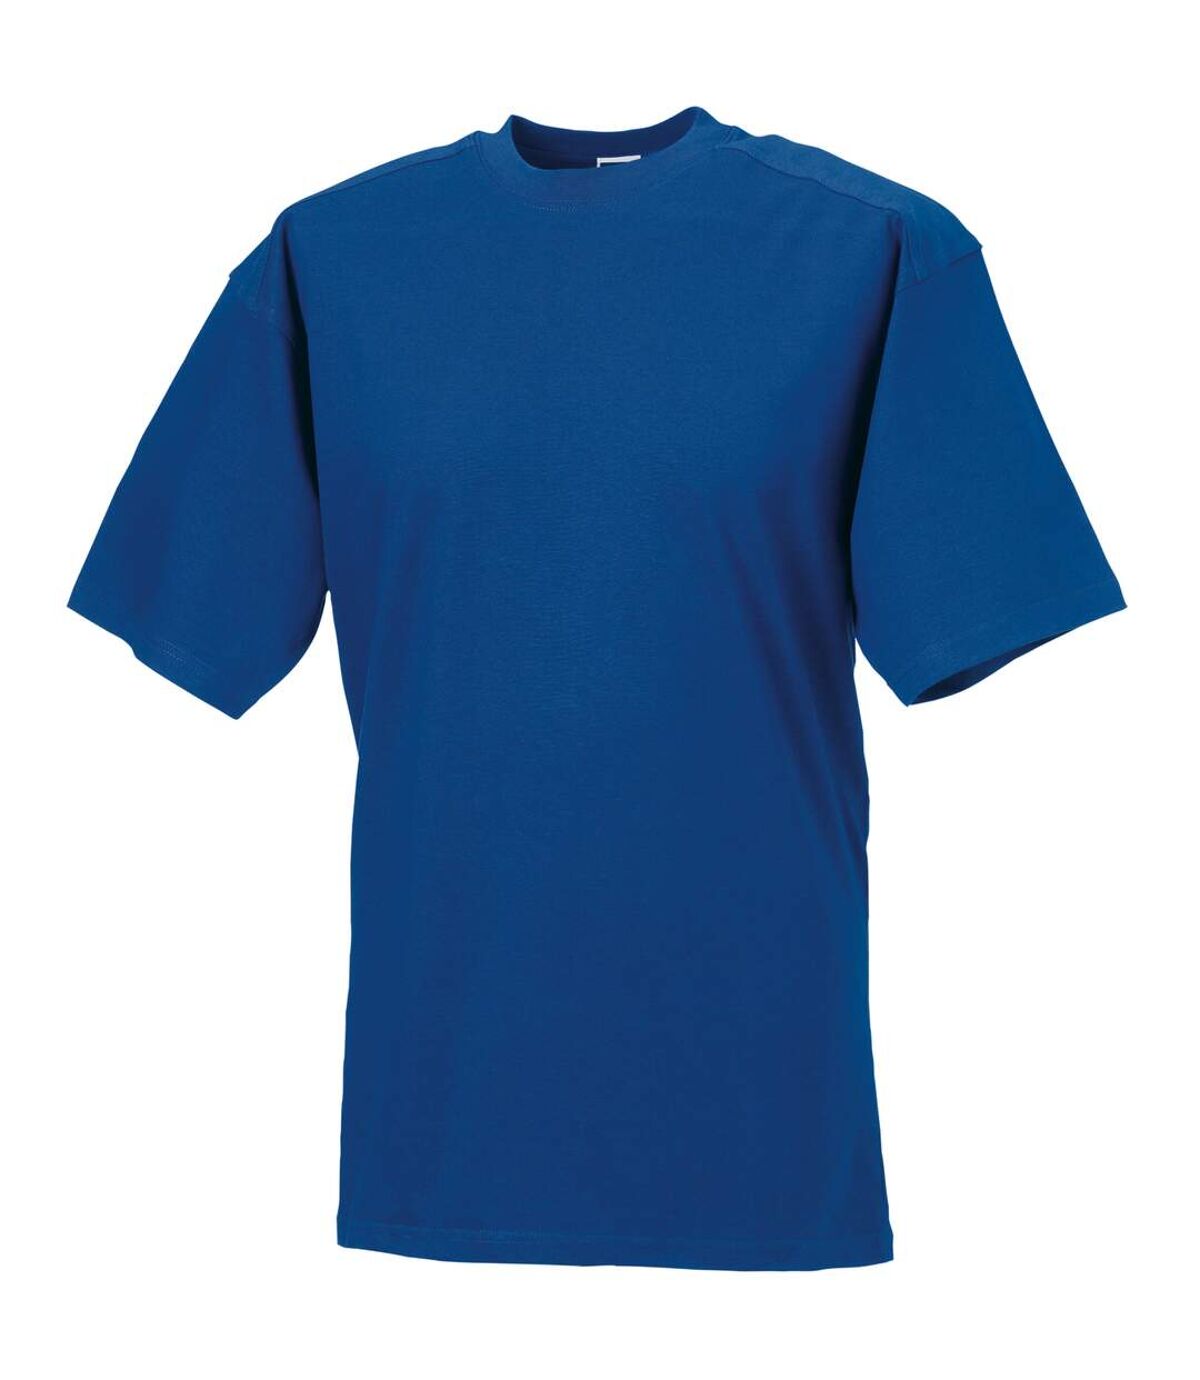 Russell Europe Mens Workwear Short Sleeve Cotton T-Shirt (Bright Royal)